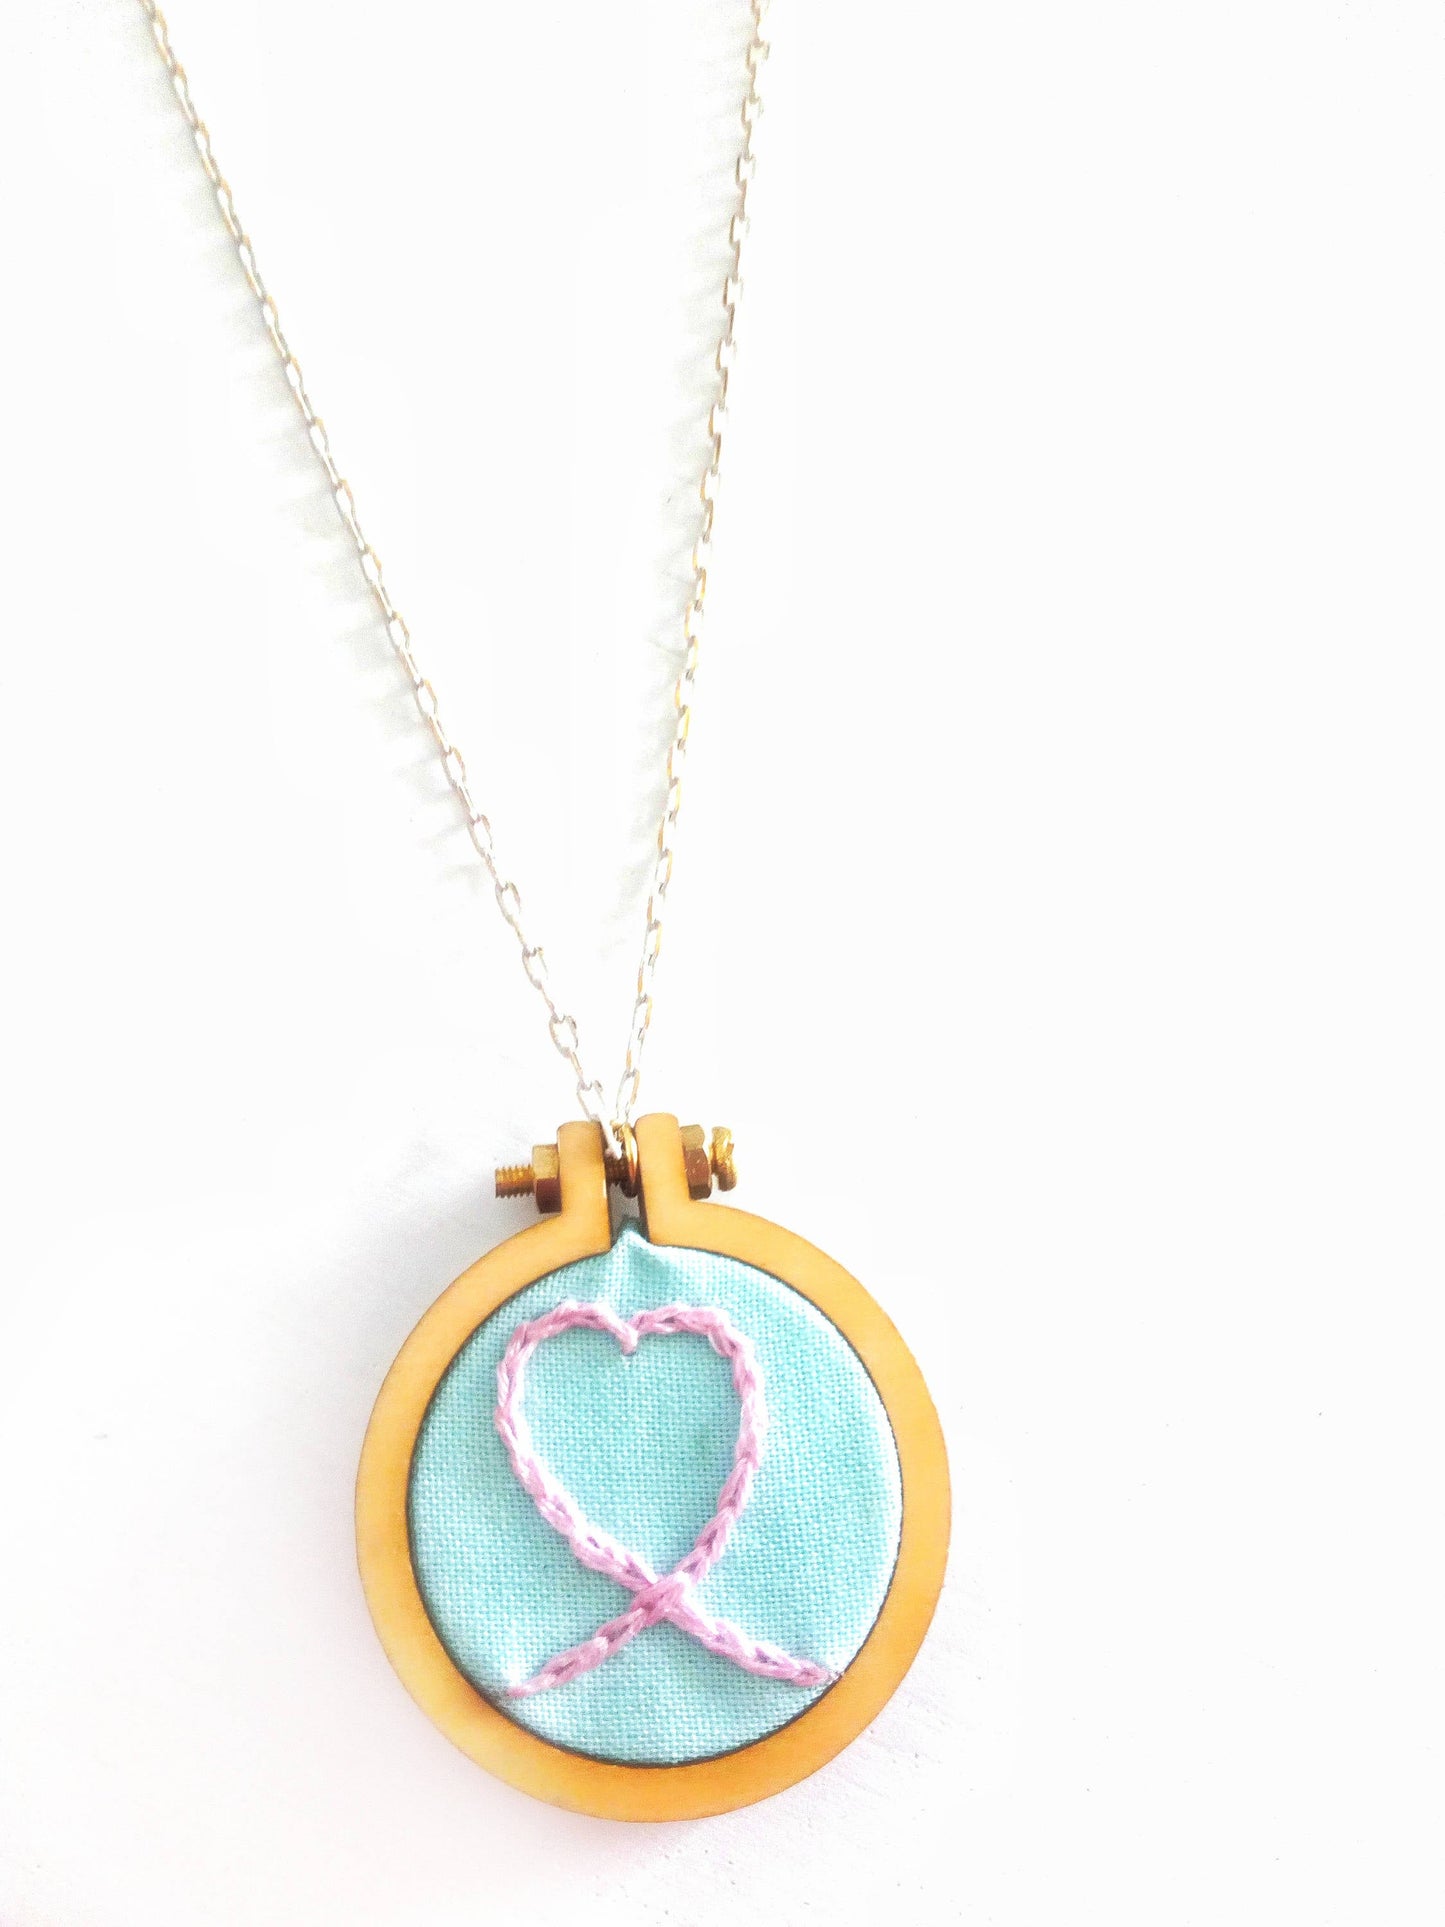 Pink Heart Charm Necklace, Miniature Embroidery Hoop Pendant